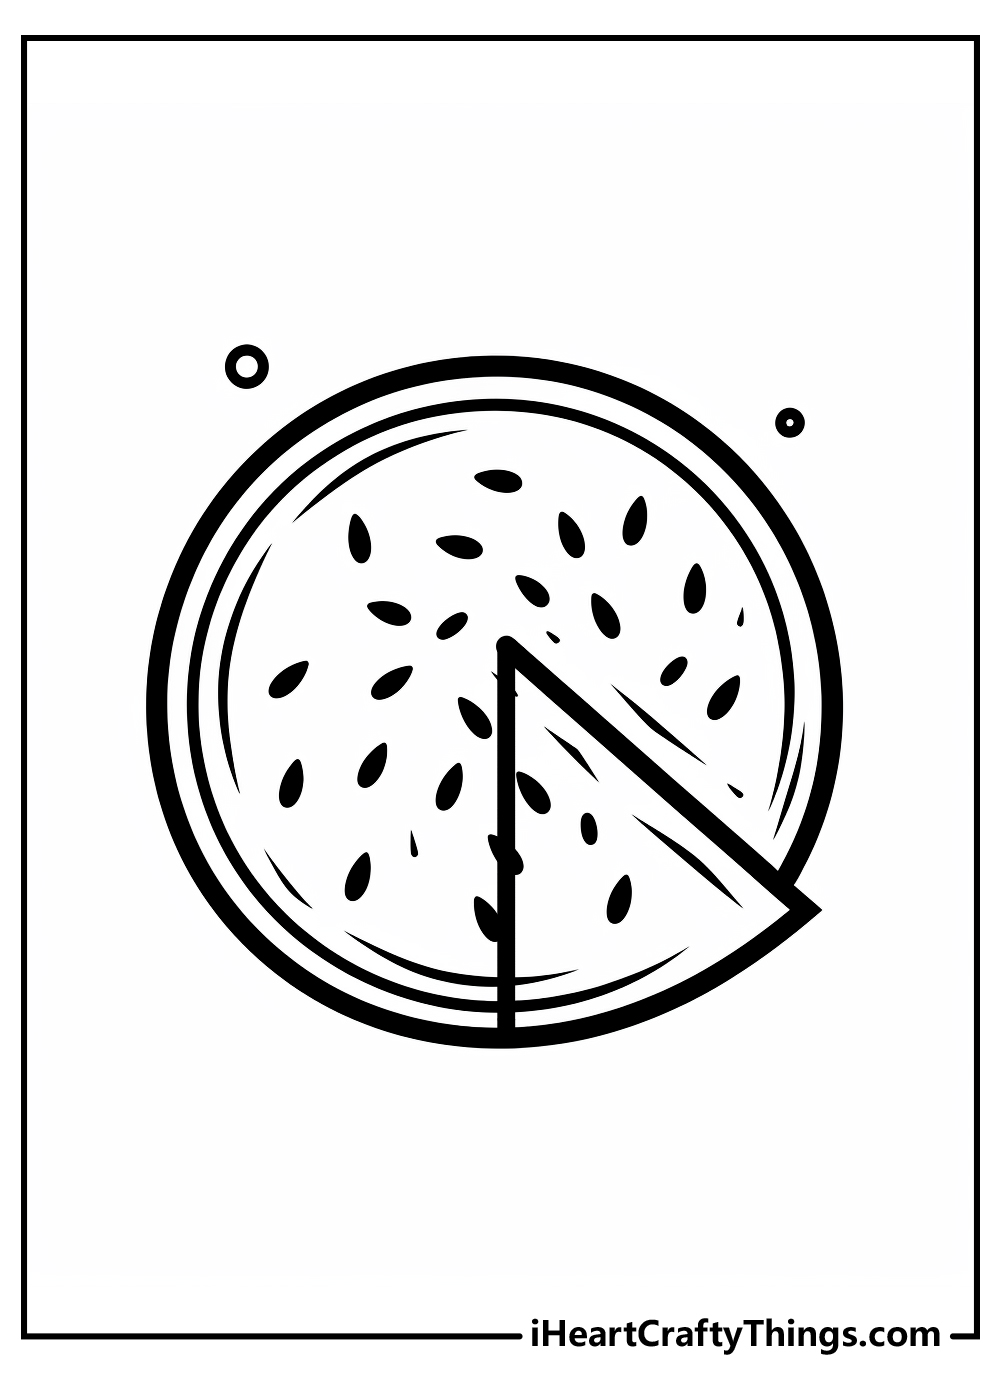 black-and-white watermelon coloring pages